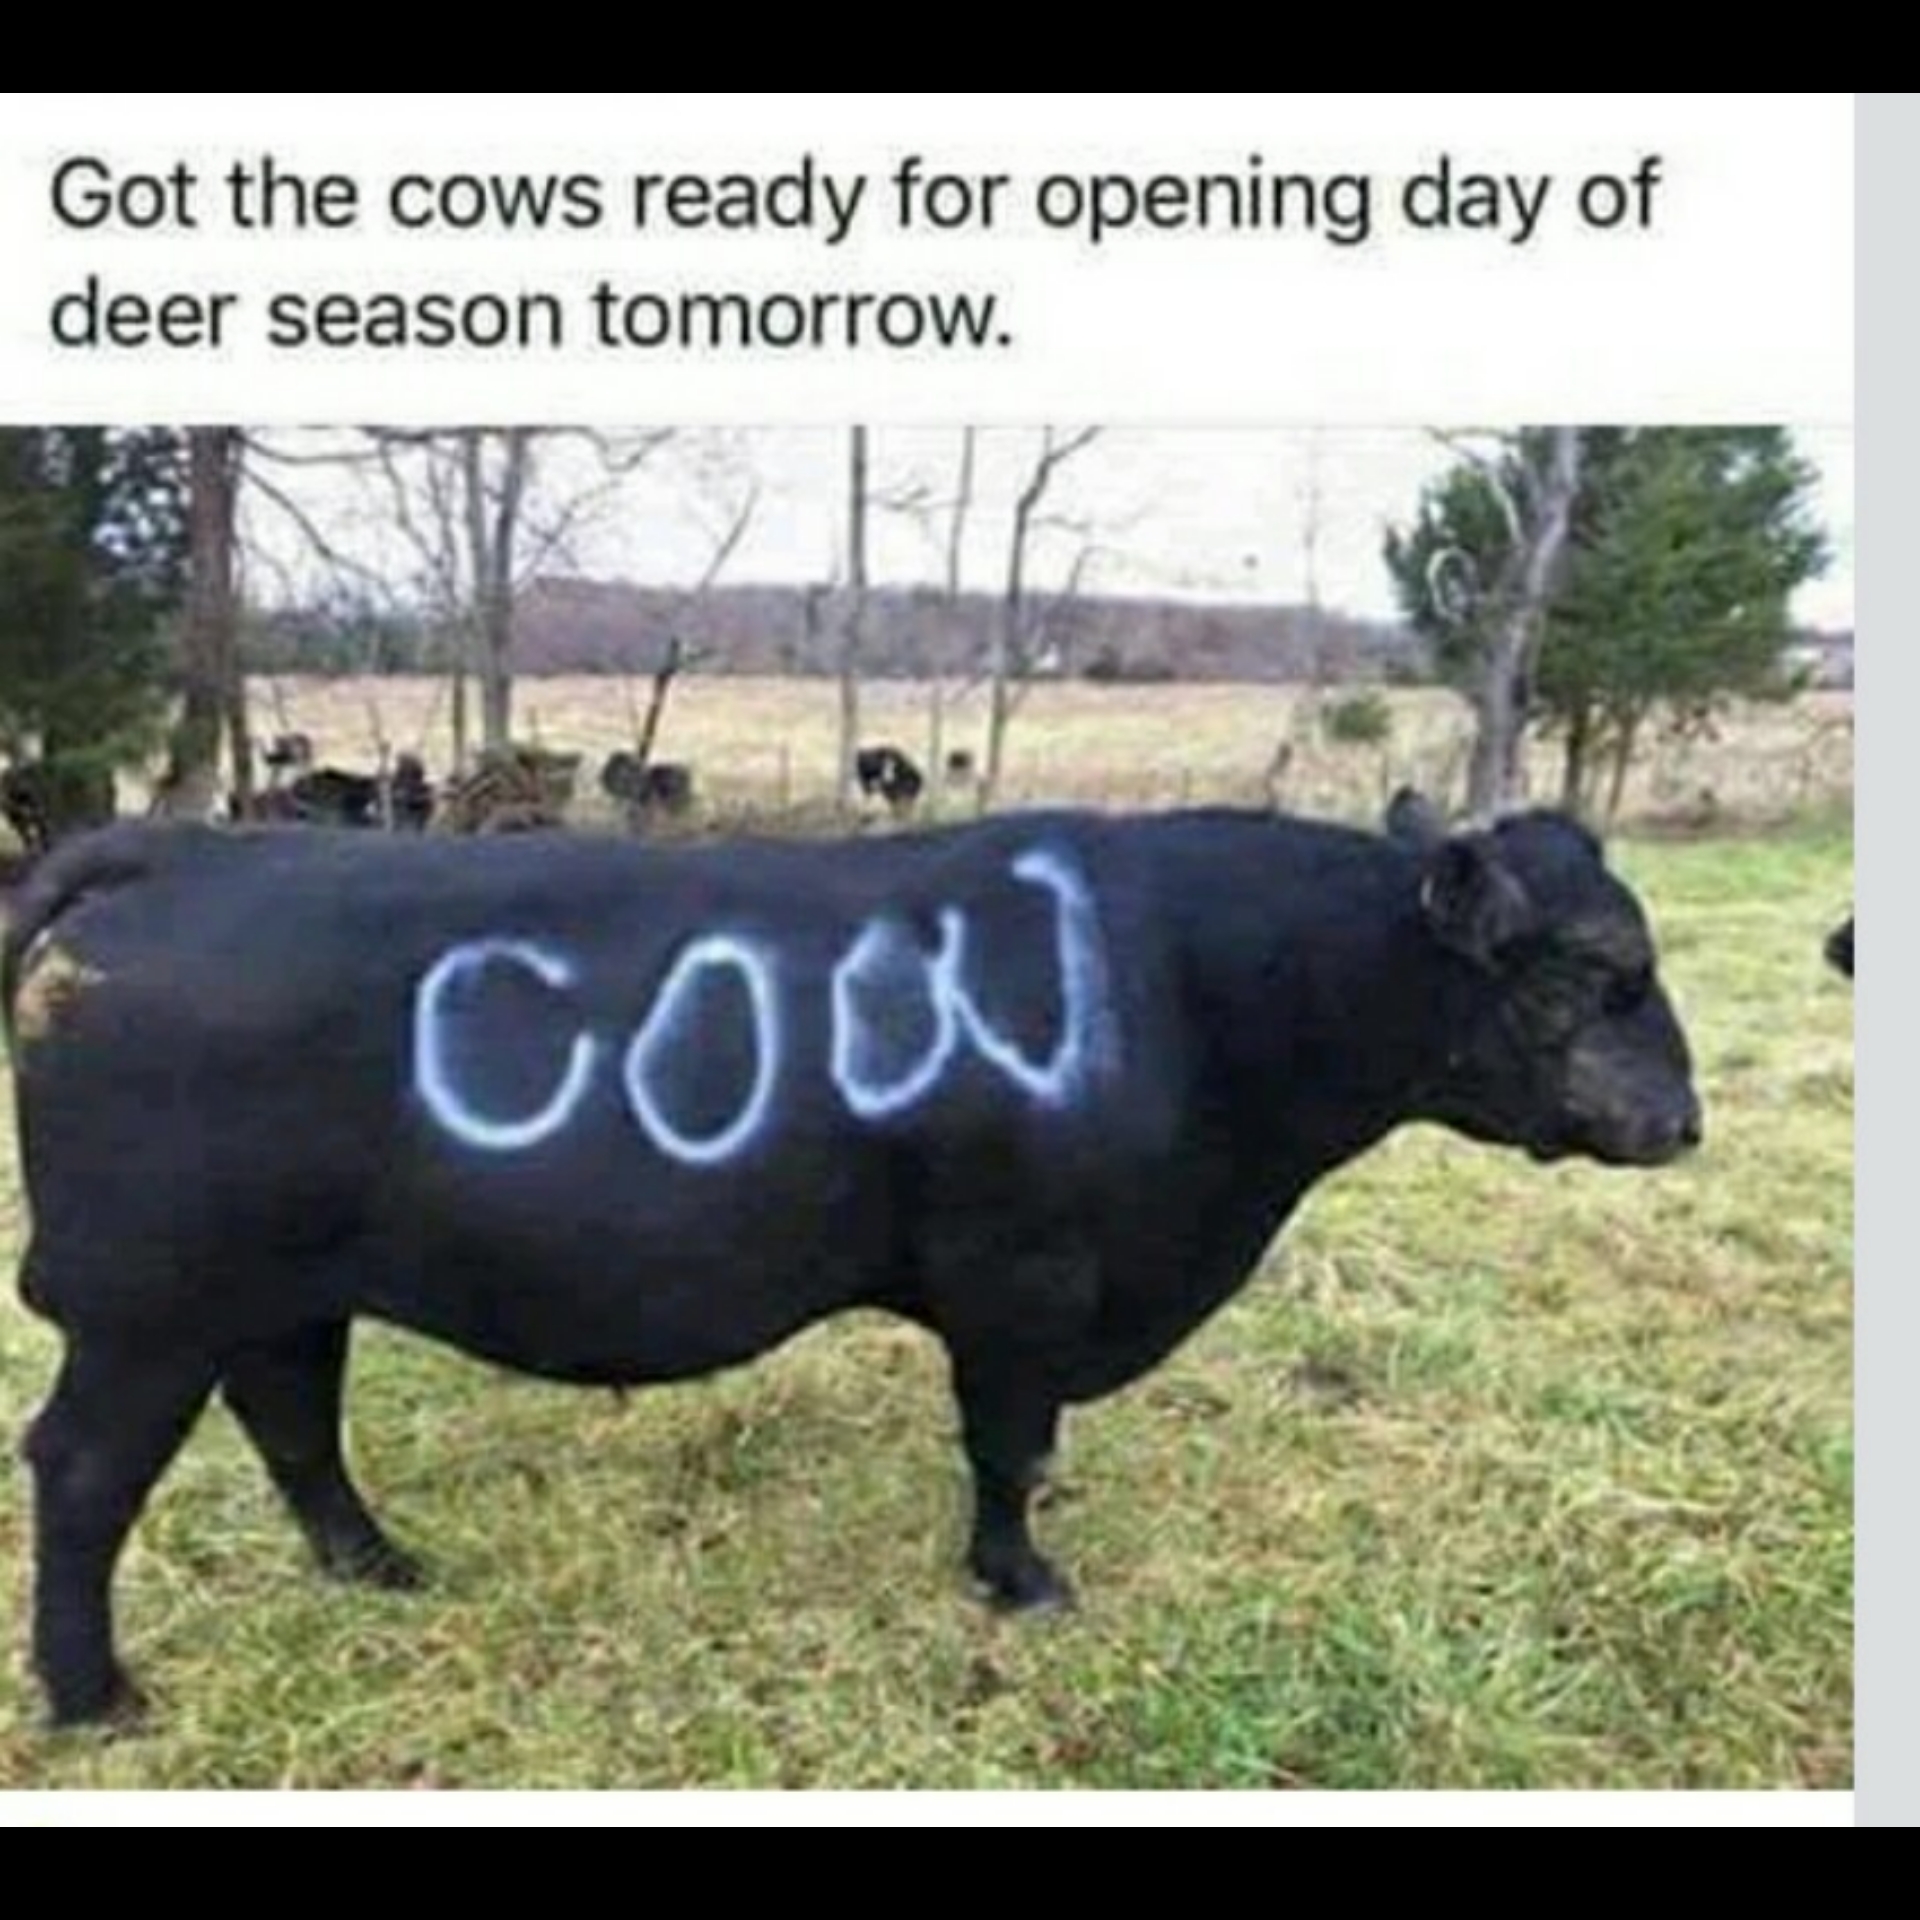 cows deer season - Got the cows ready for opening day of deer season tomorrow. Cow